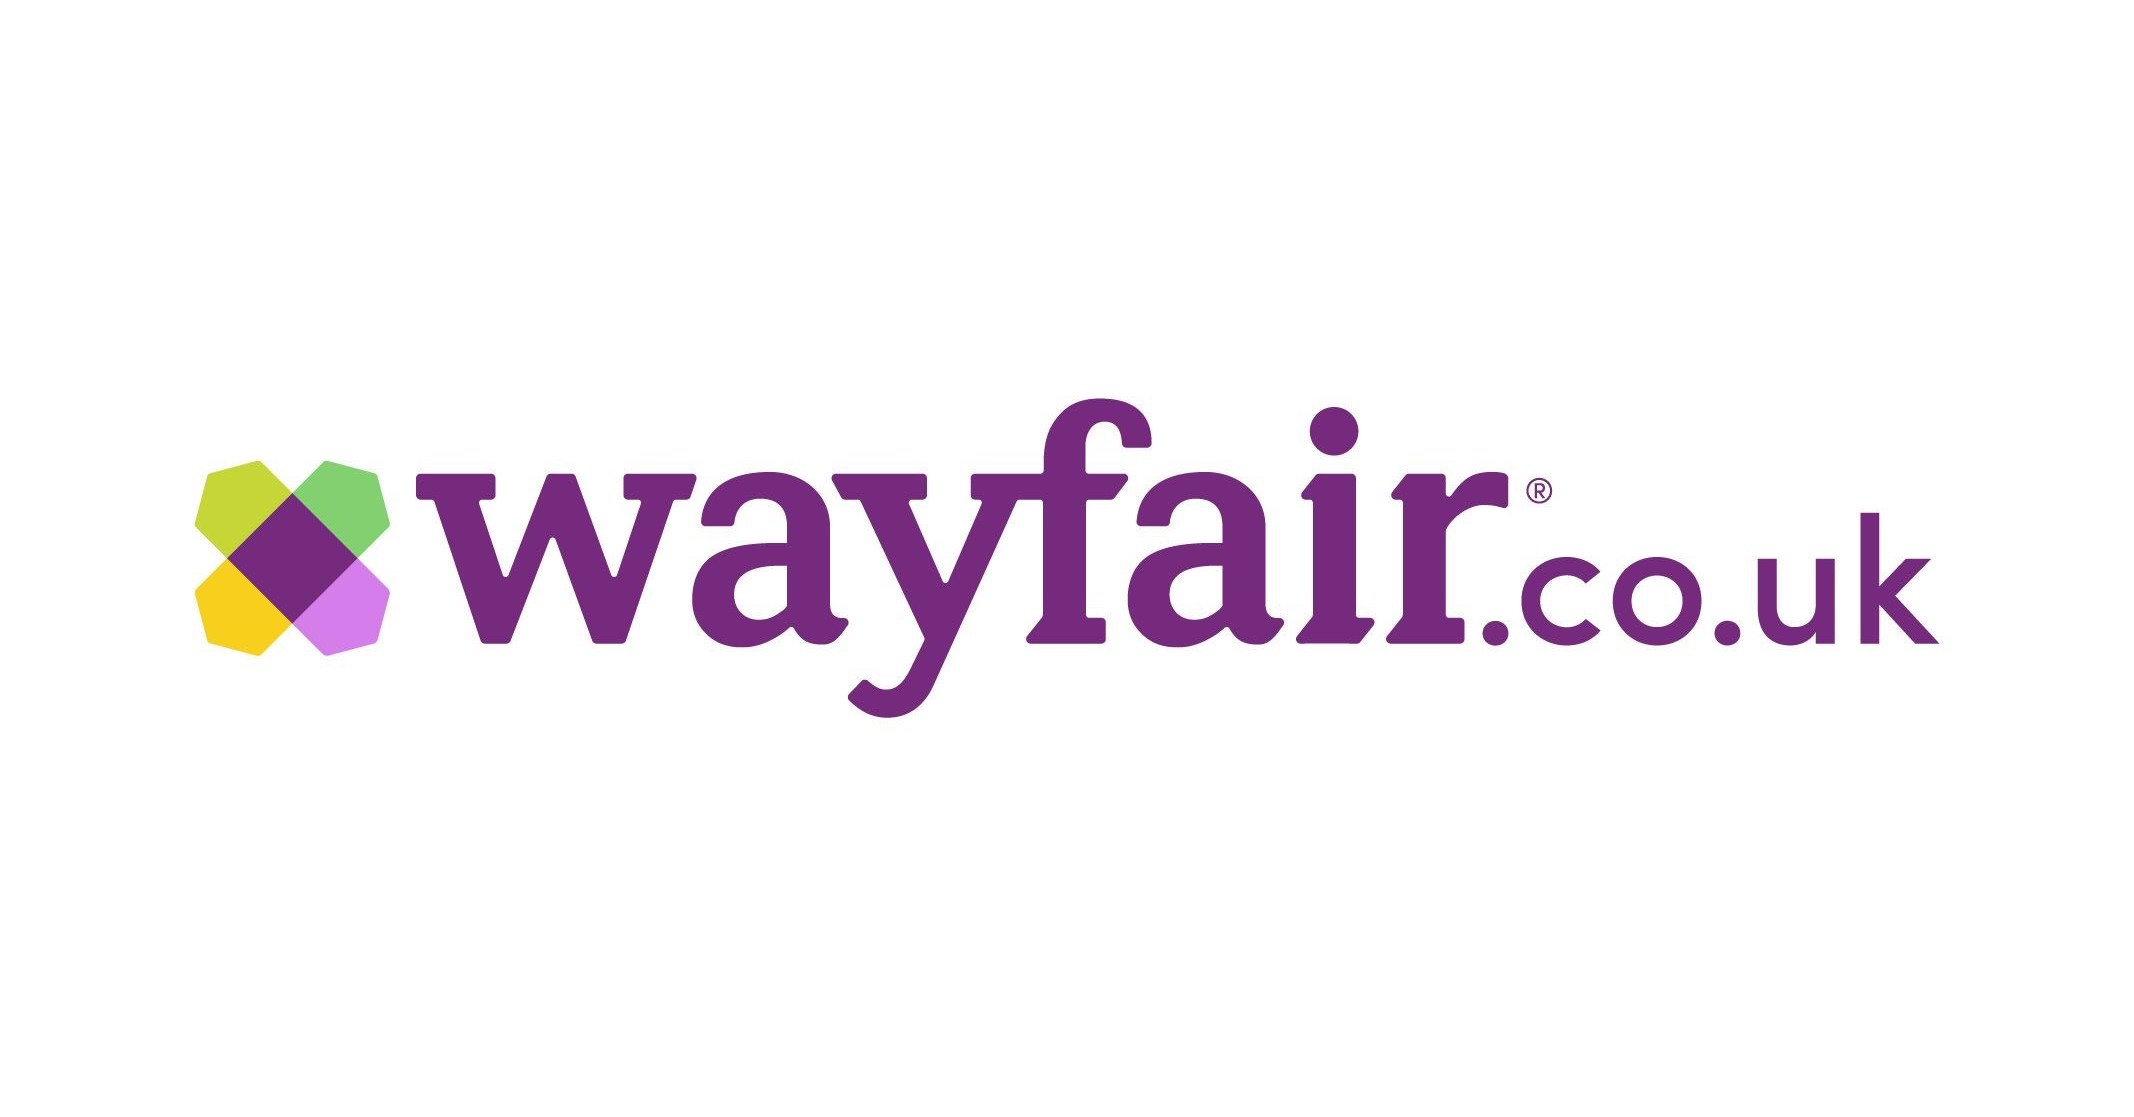 Wayfair.Co.Uk Launches New TV Campaign With Lorraine Kelly